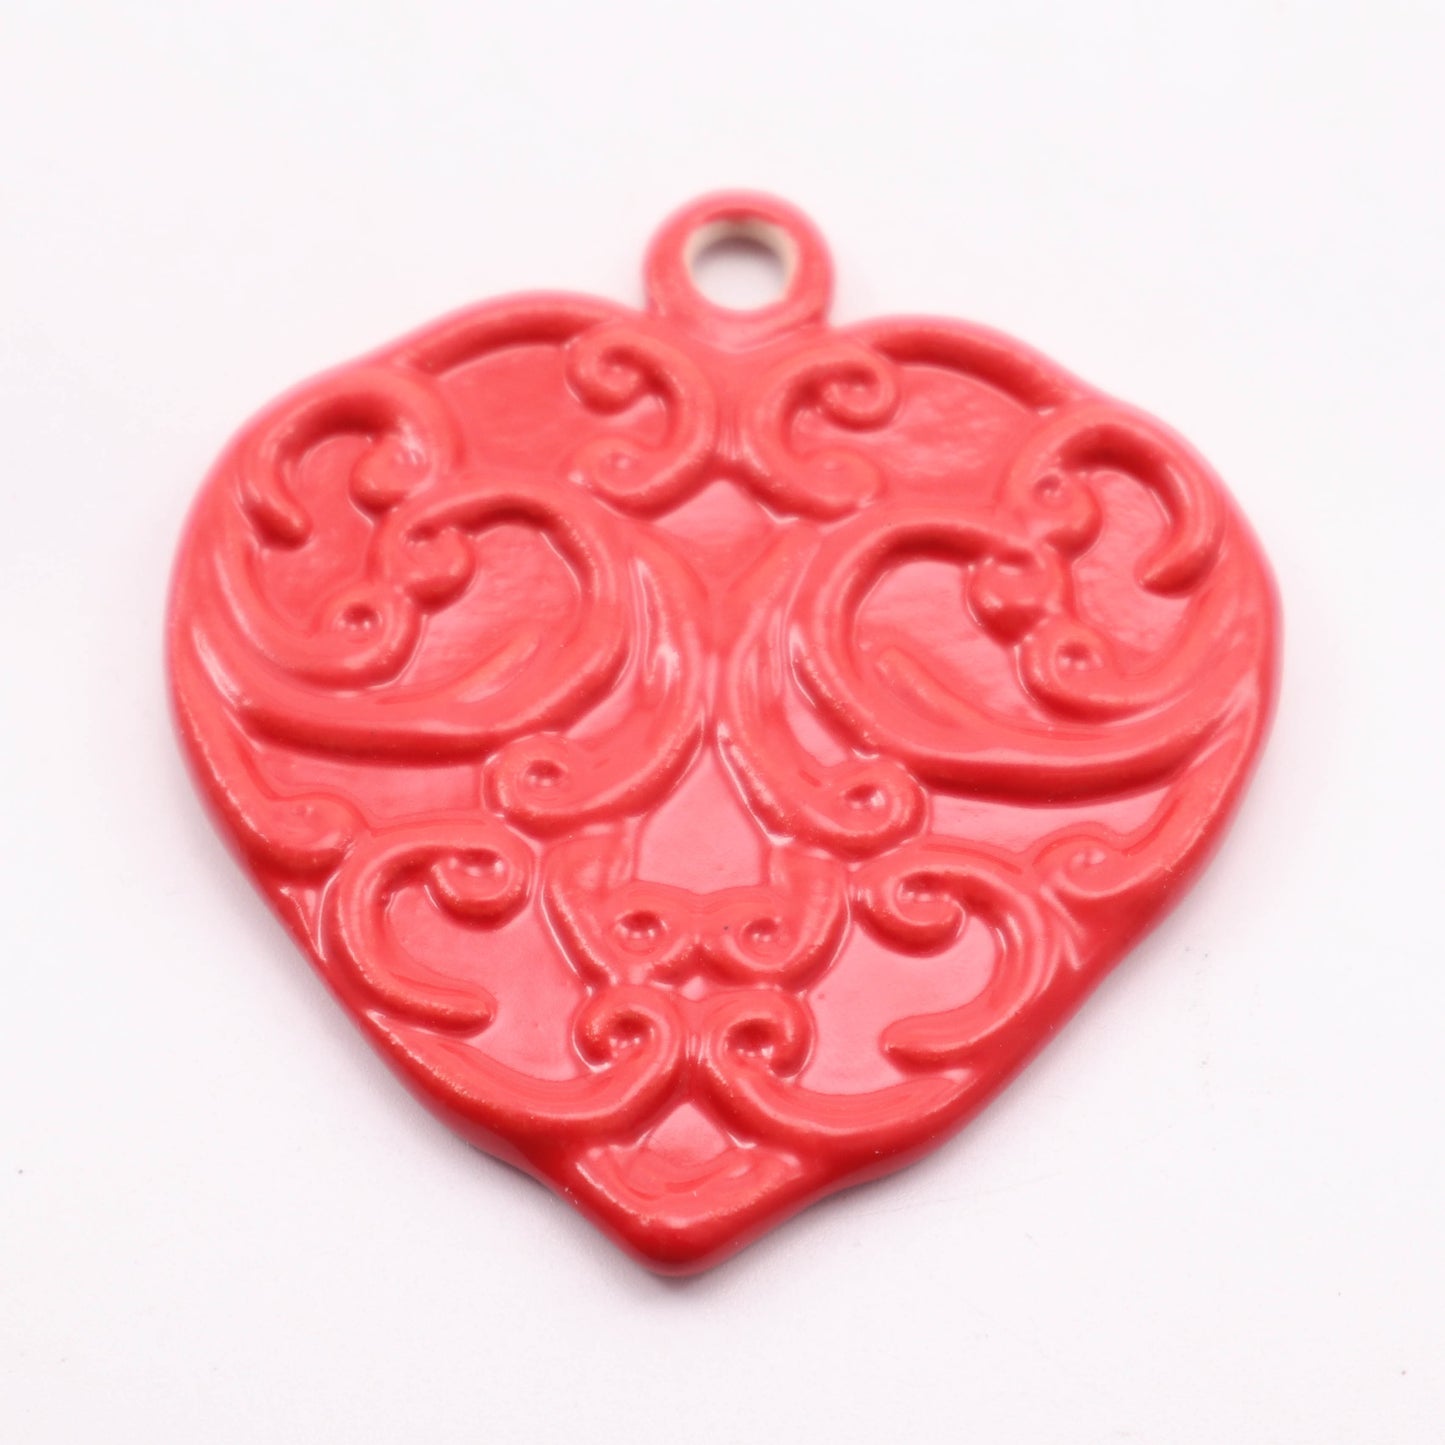 2.5" Heart Ornament. Pattern: Red